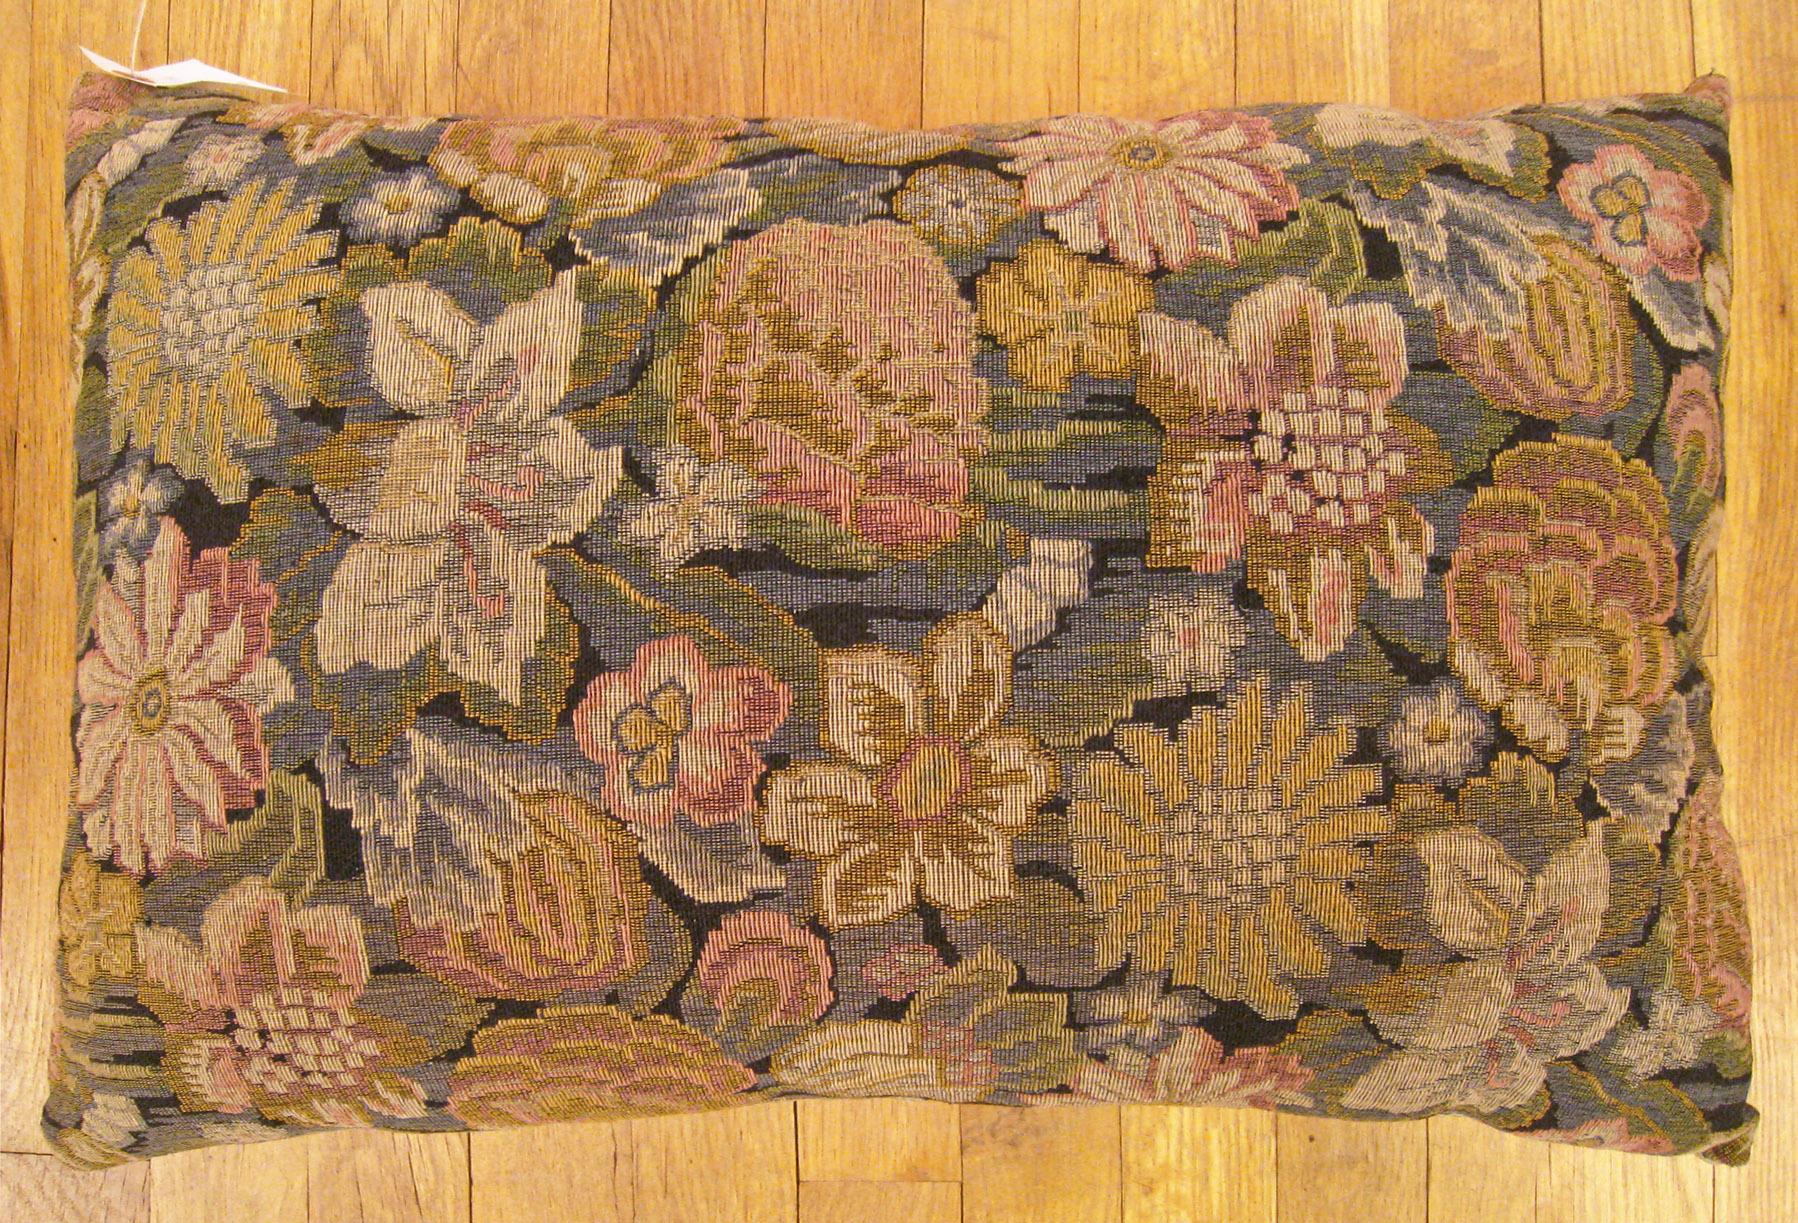 Antique Jacquard Tapestry Pillow; size 1'4” x 2'0”.

An antique decorative pillow with floral elements allover a gold gray central field, size 1'4